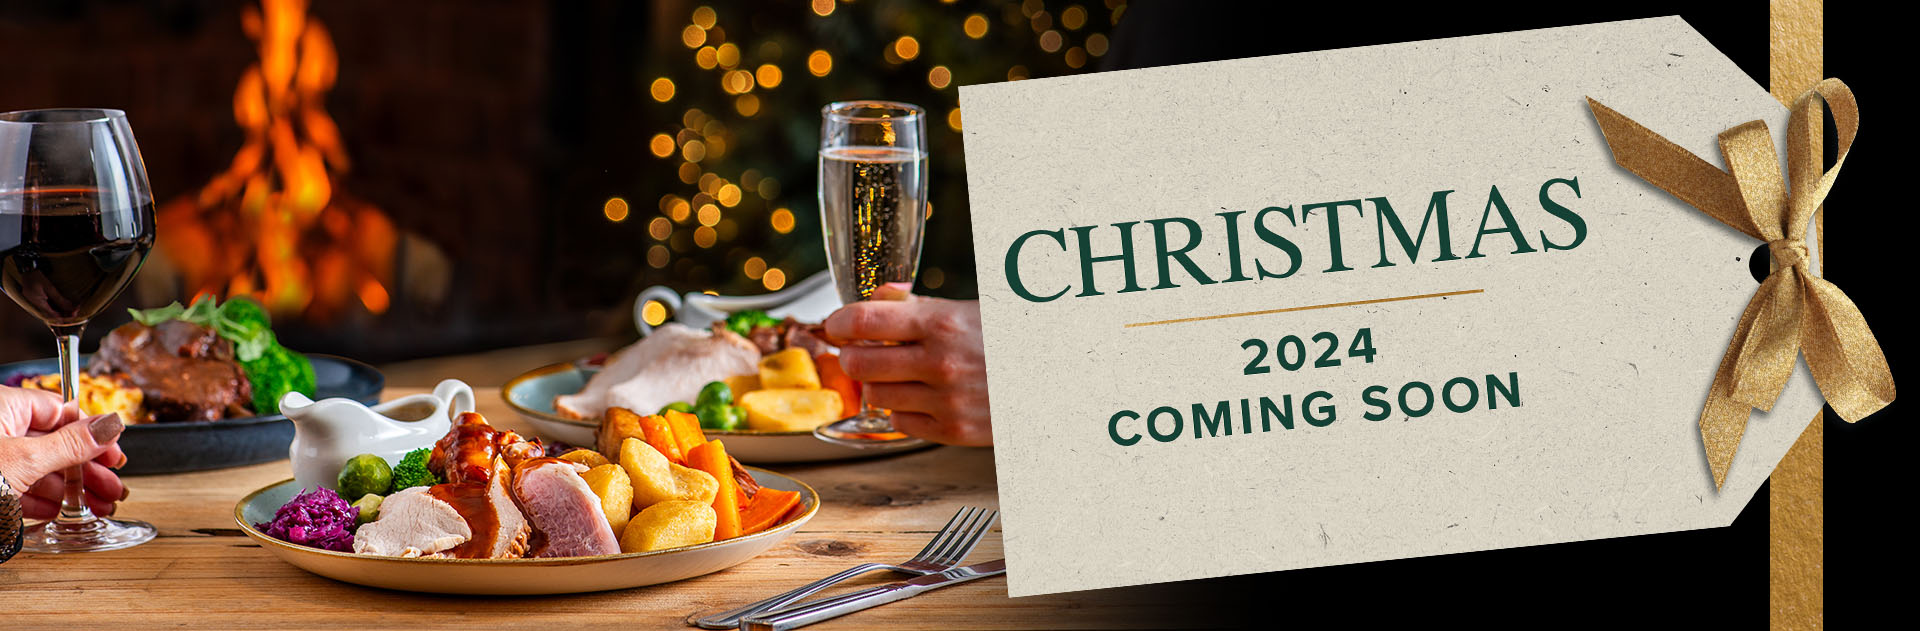 Christmas at The Blunsdon Arms 